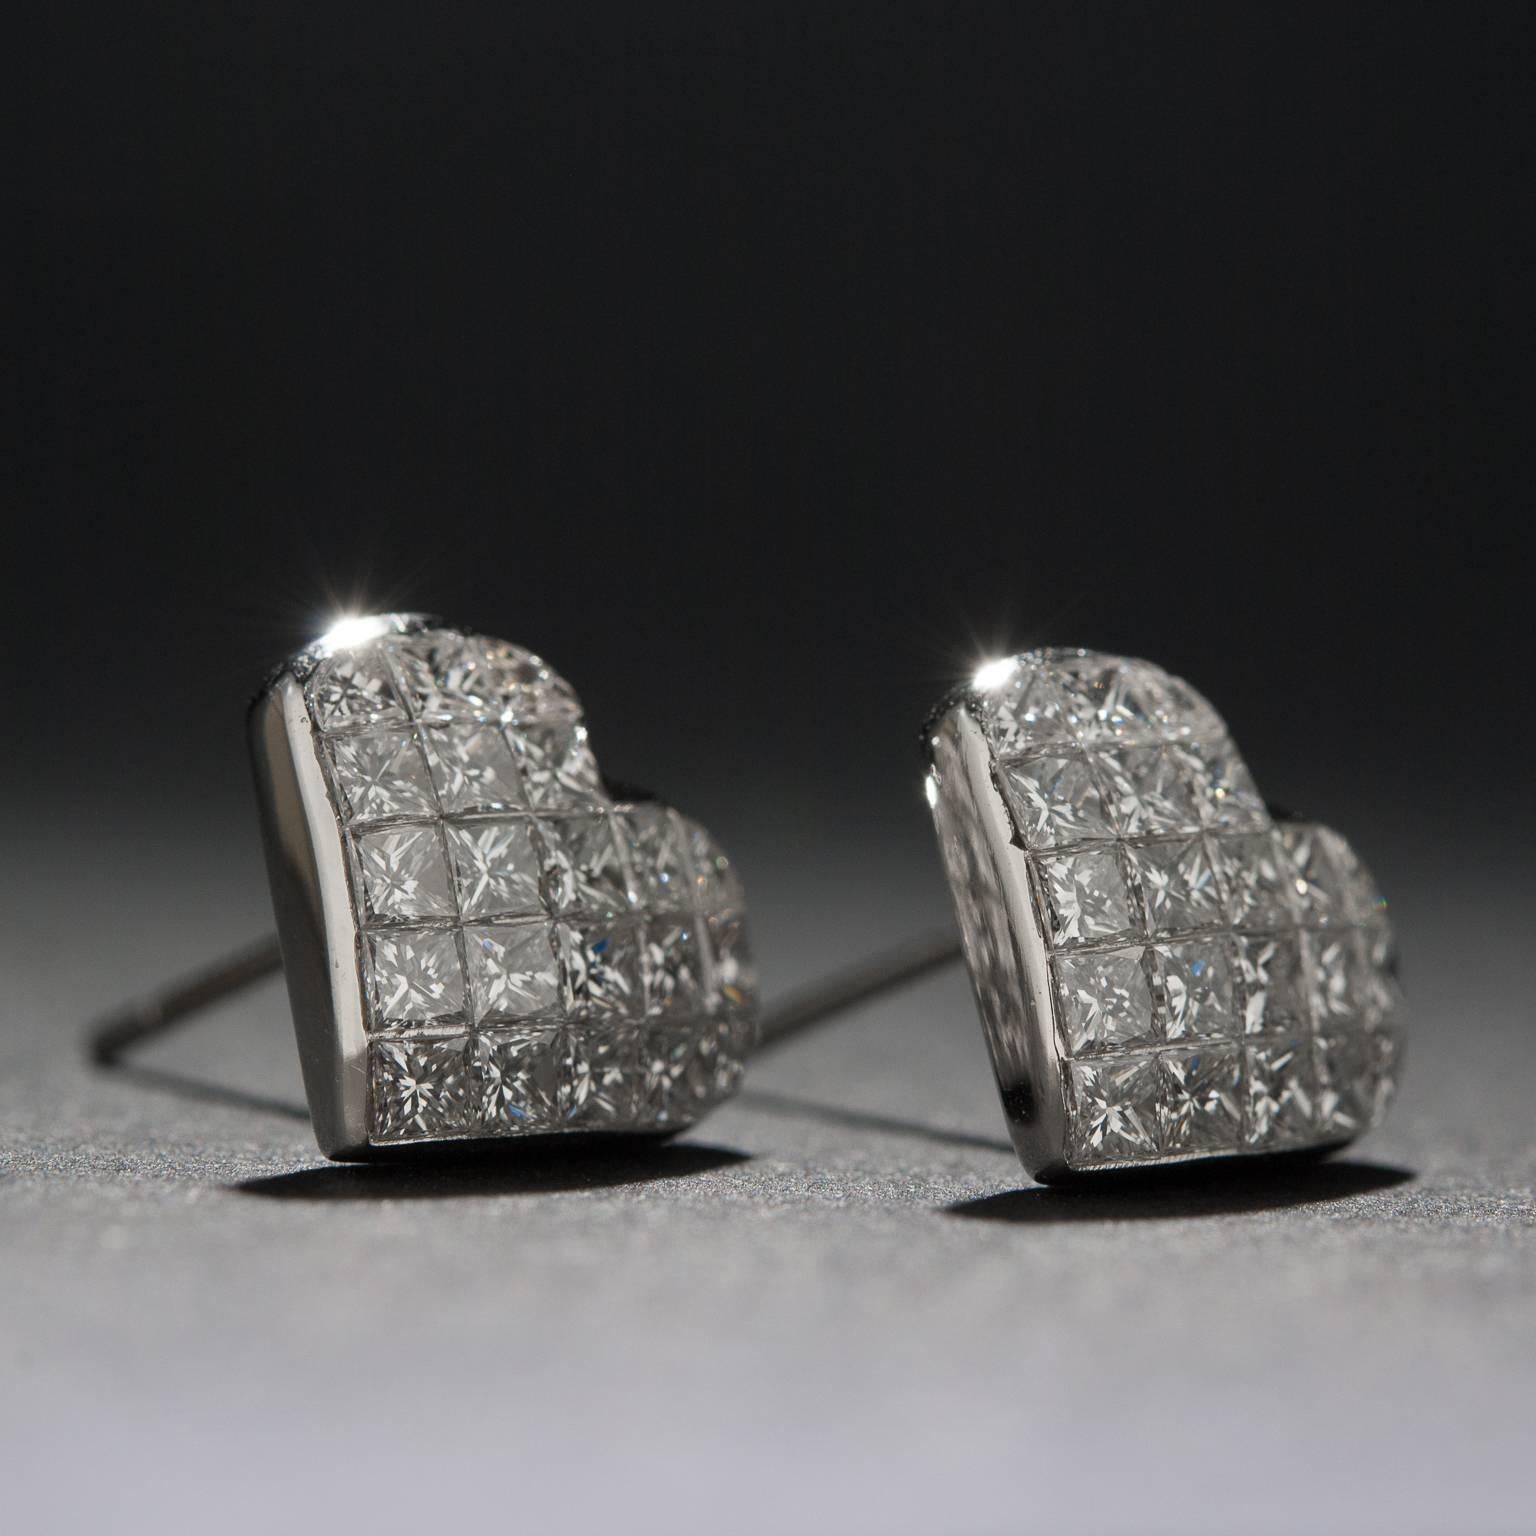 This lovely pair of diamond stud earrings features 42 invisible-set princess cut diamonds for 1.50 total carats. This piece is crafted in 18k white gold.